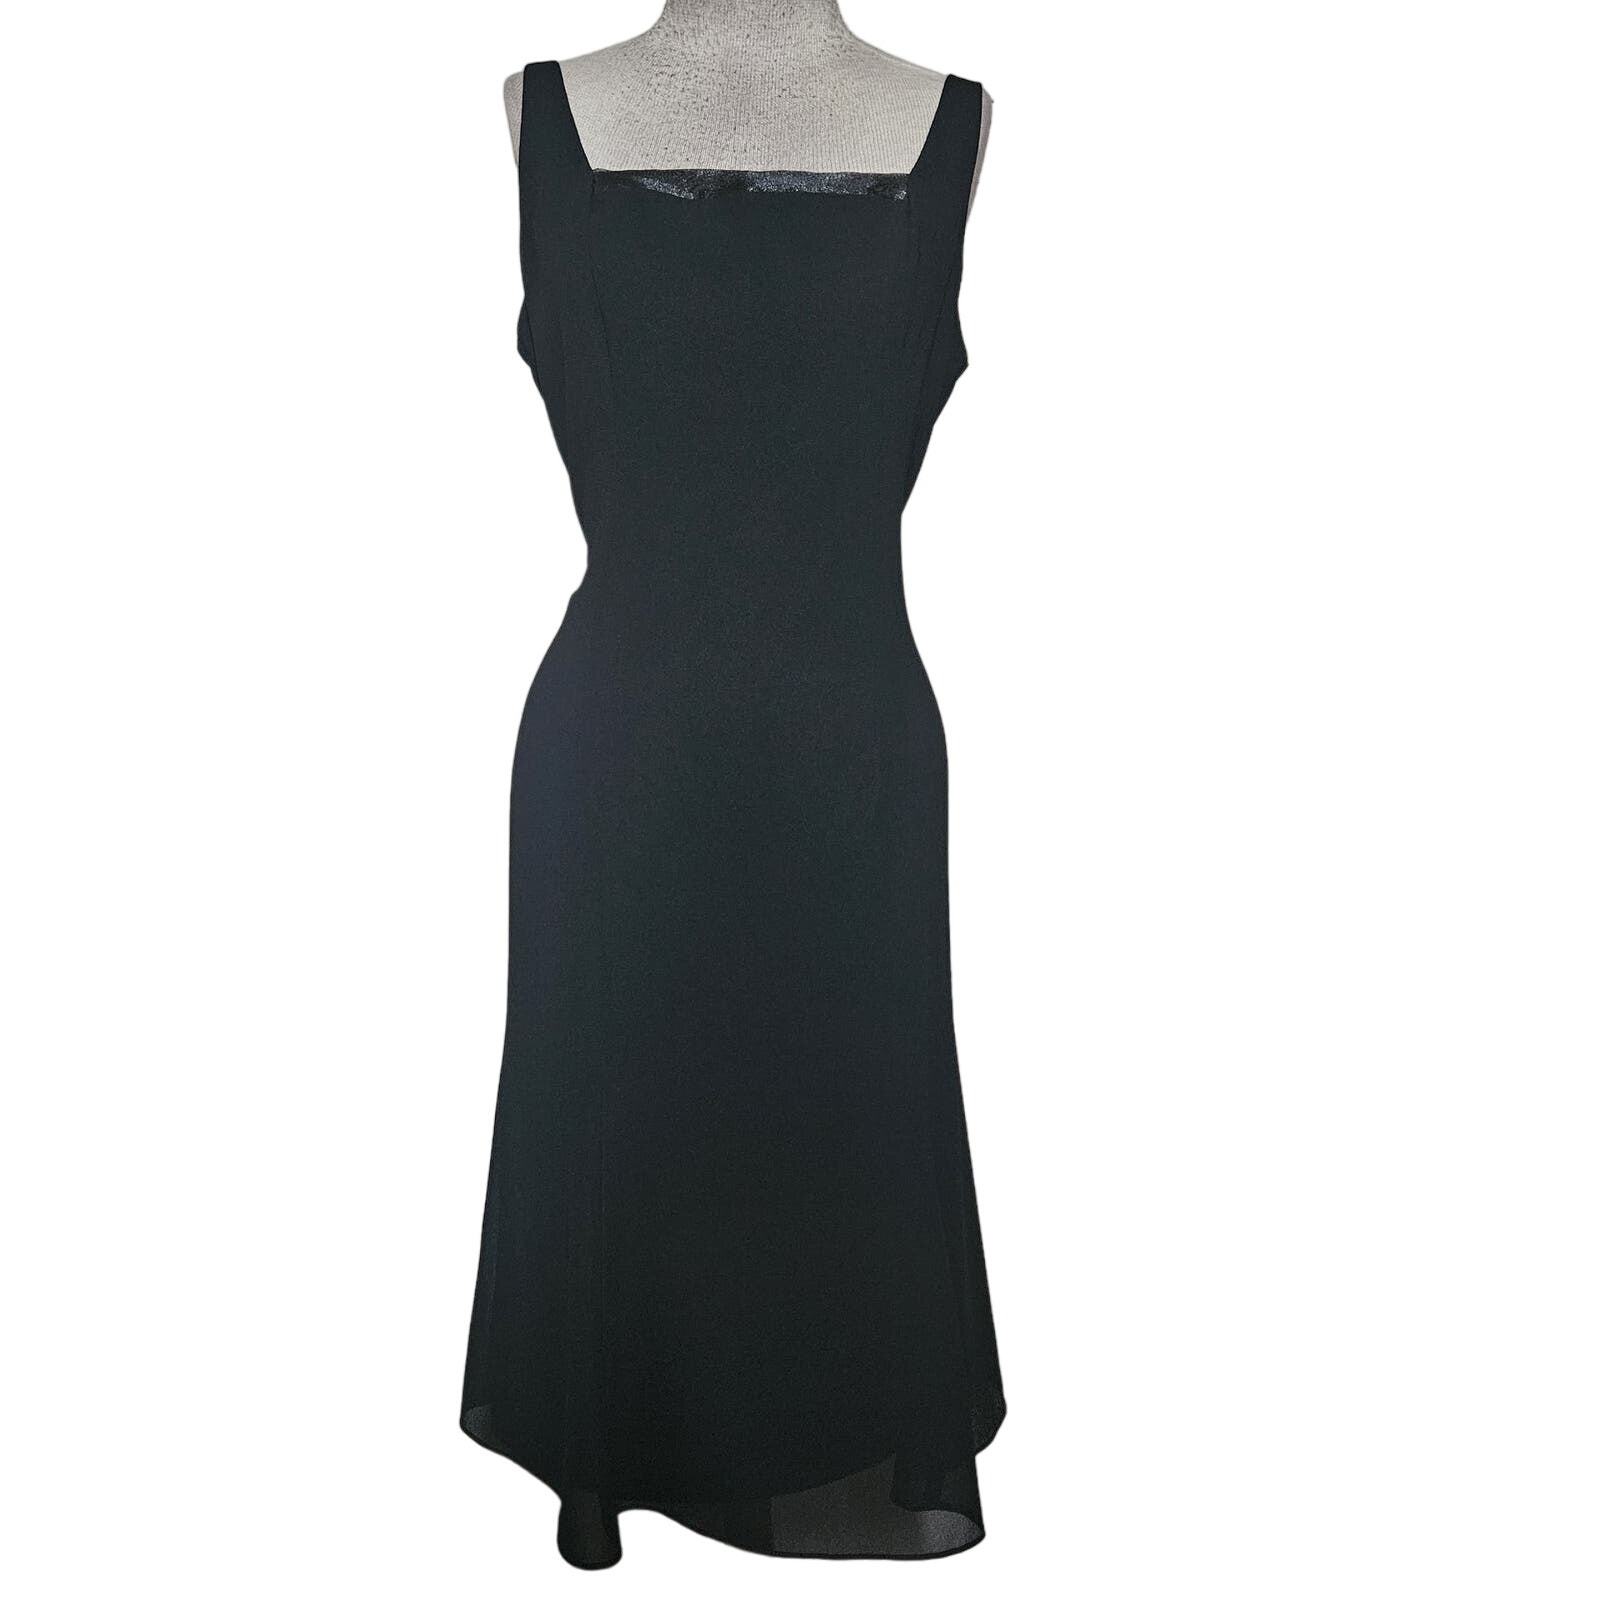 Primary image for Black Sleeveless Cocktail Dress Size 12